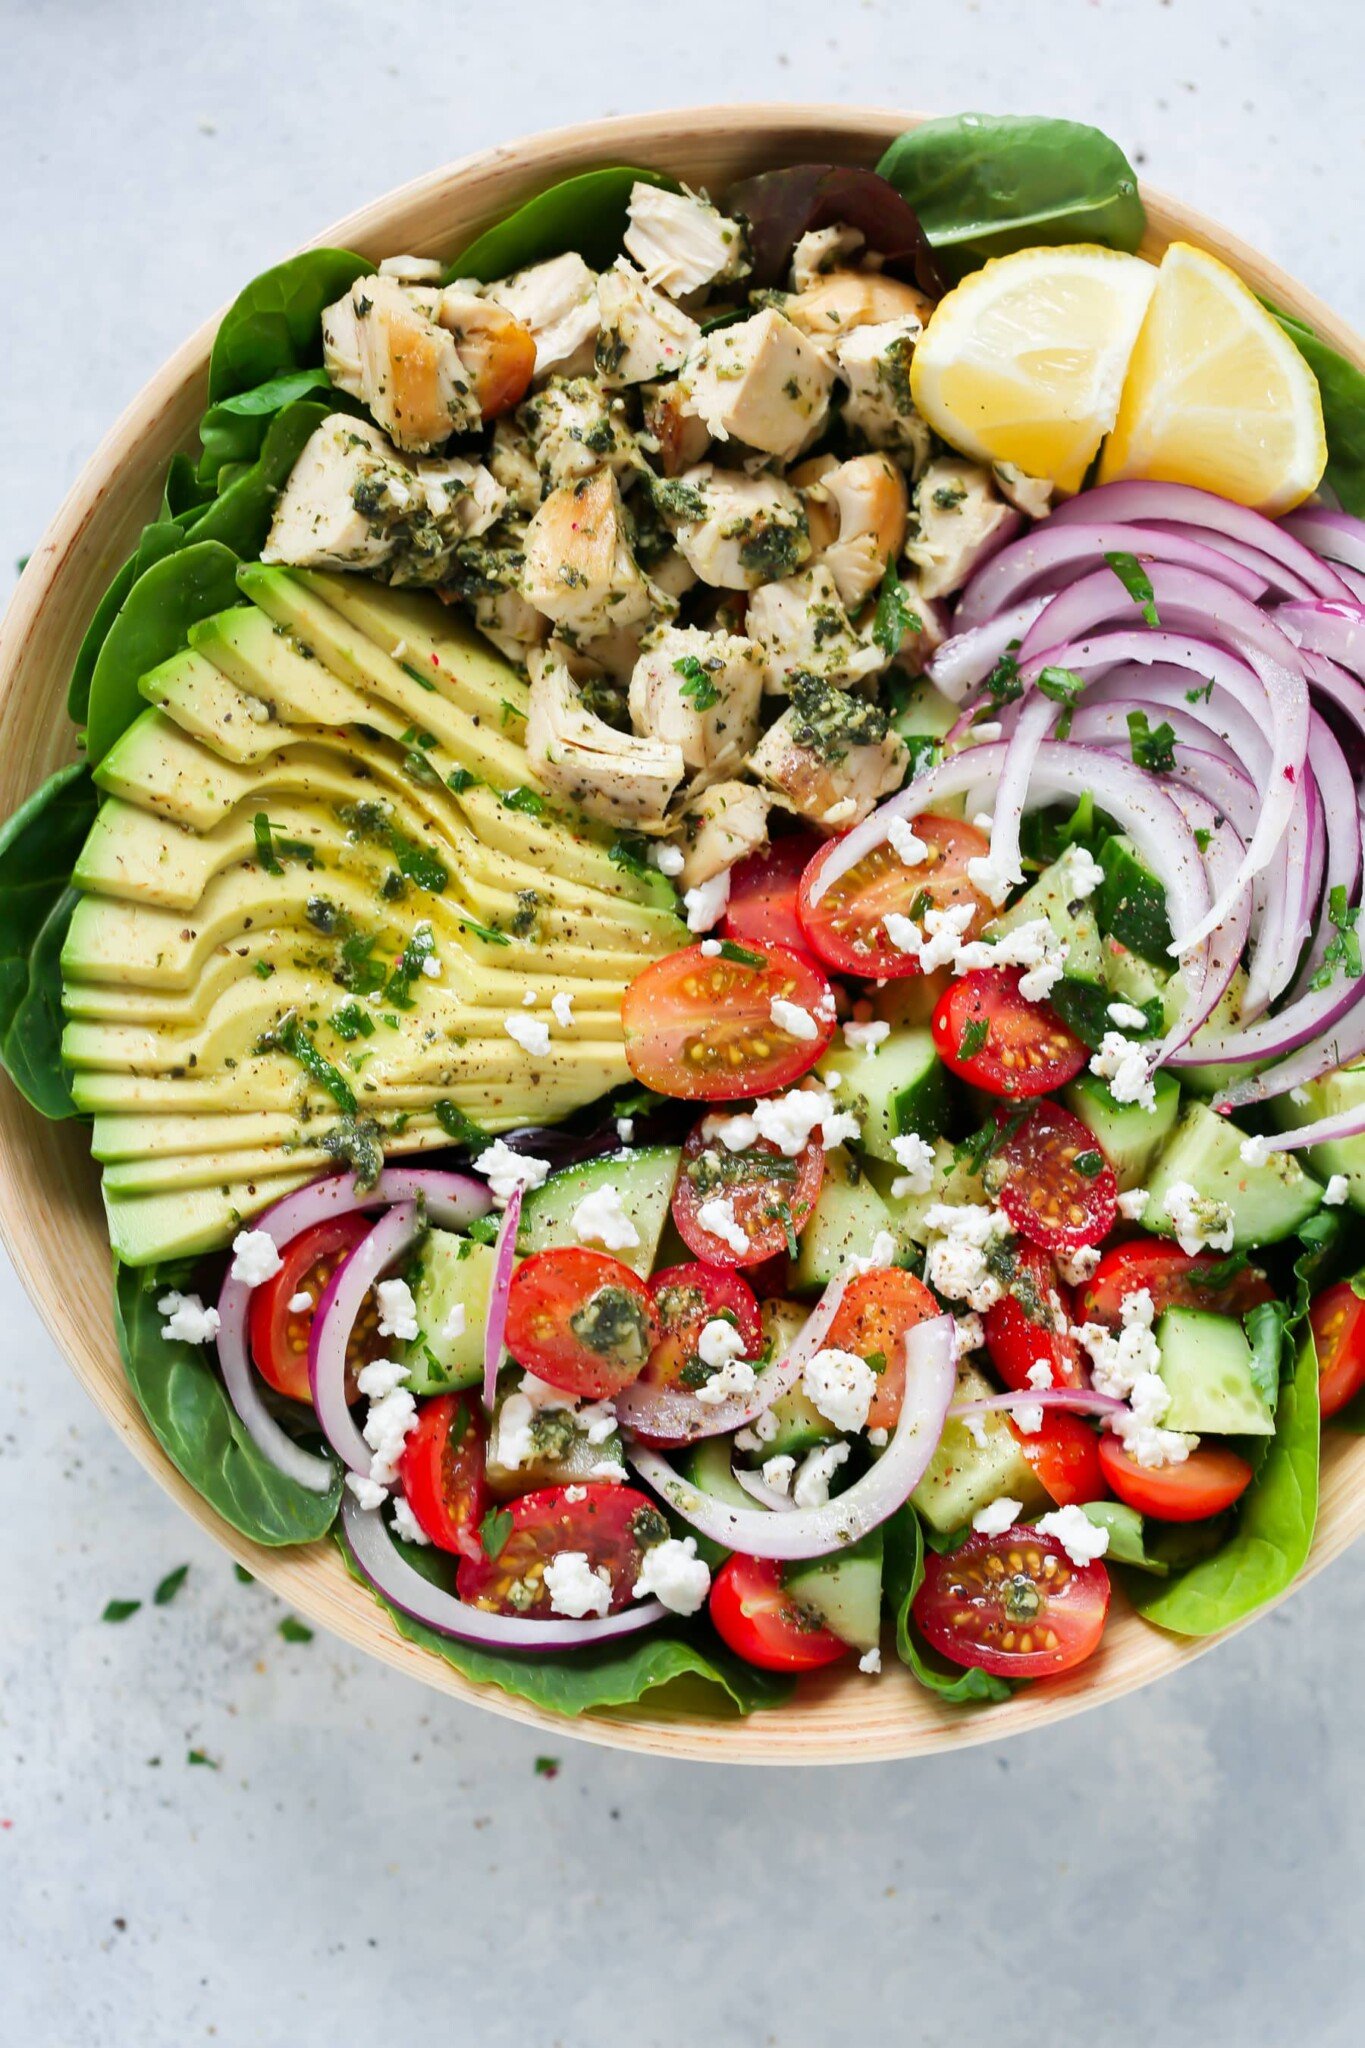 Pesto chicken salad in a large serving bowl.